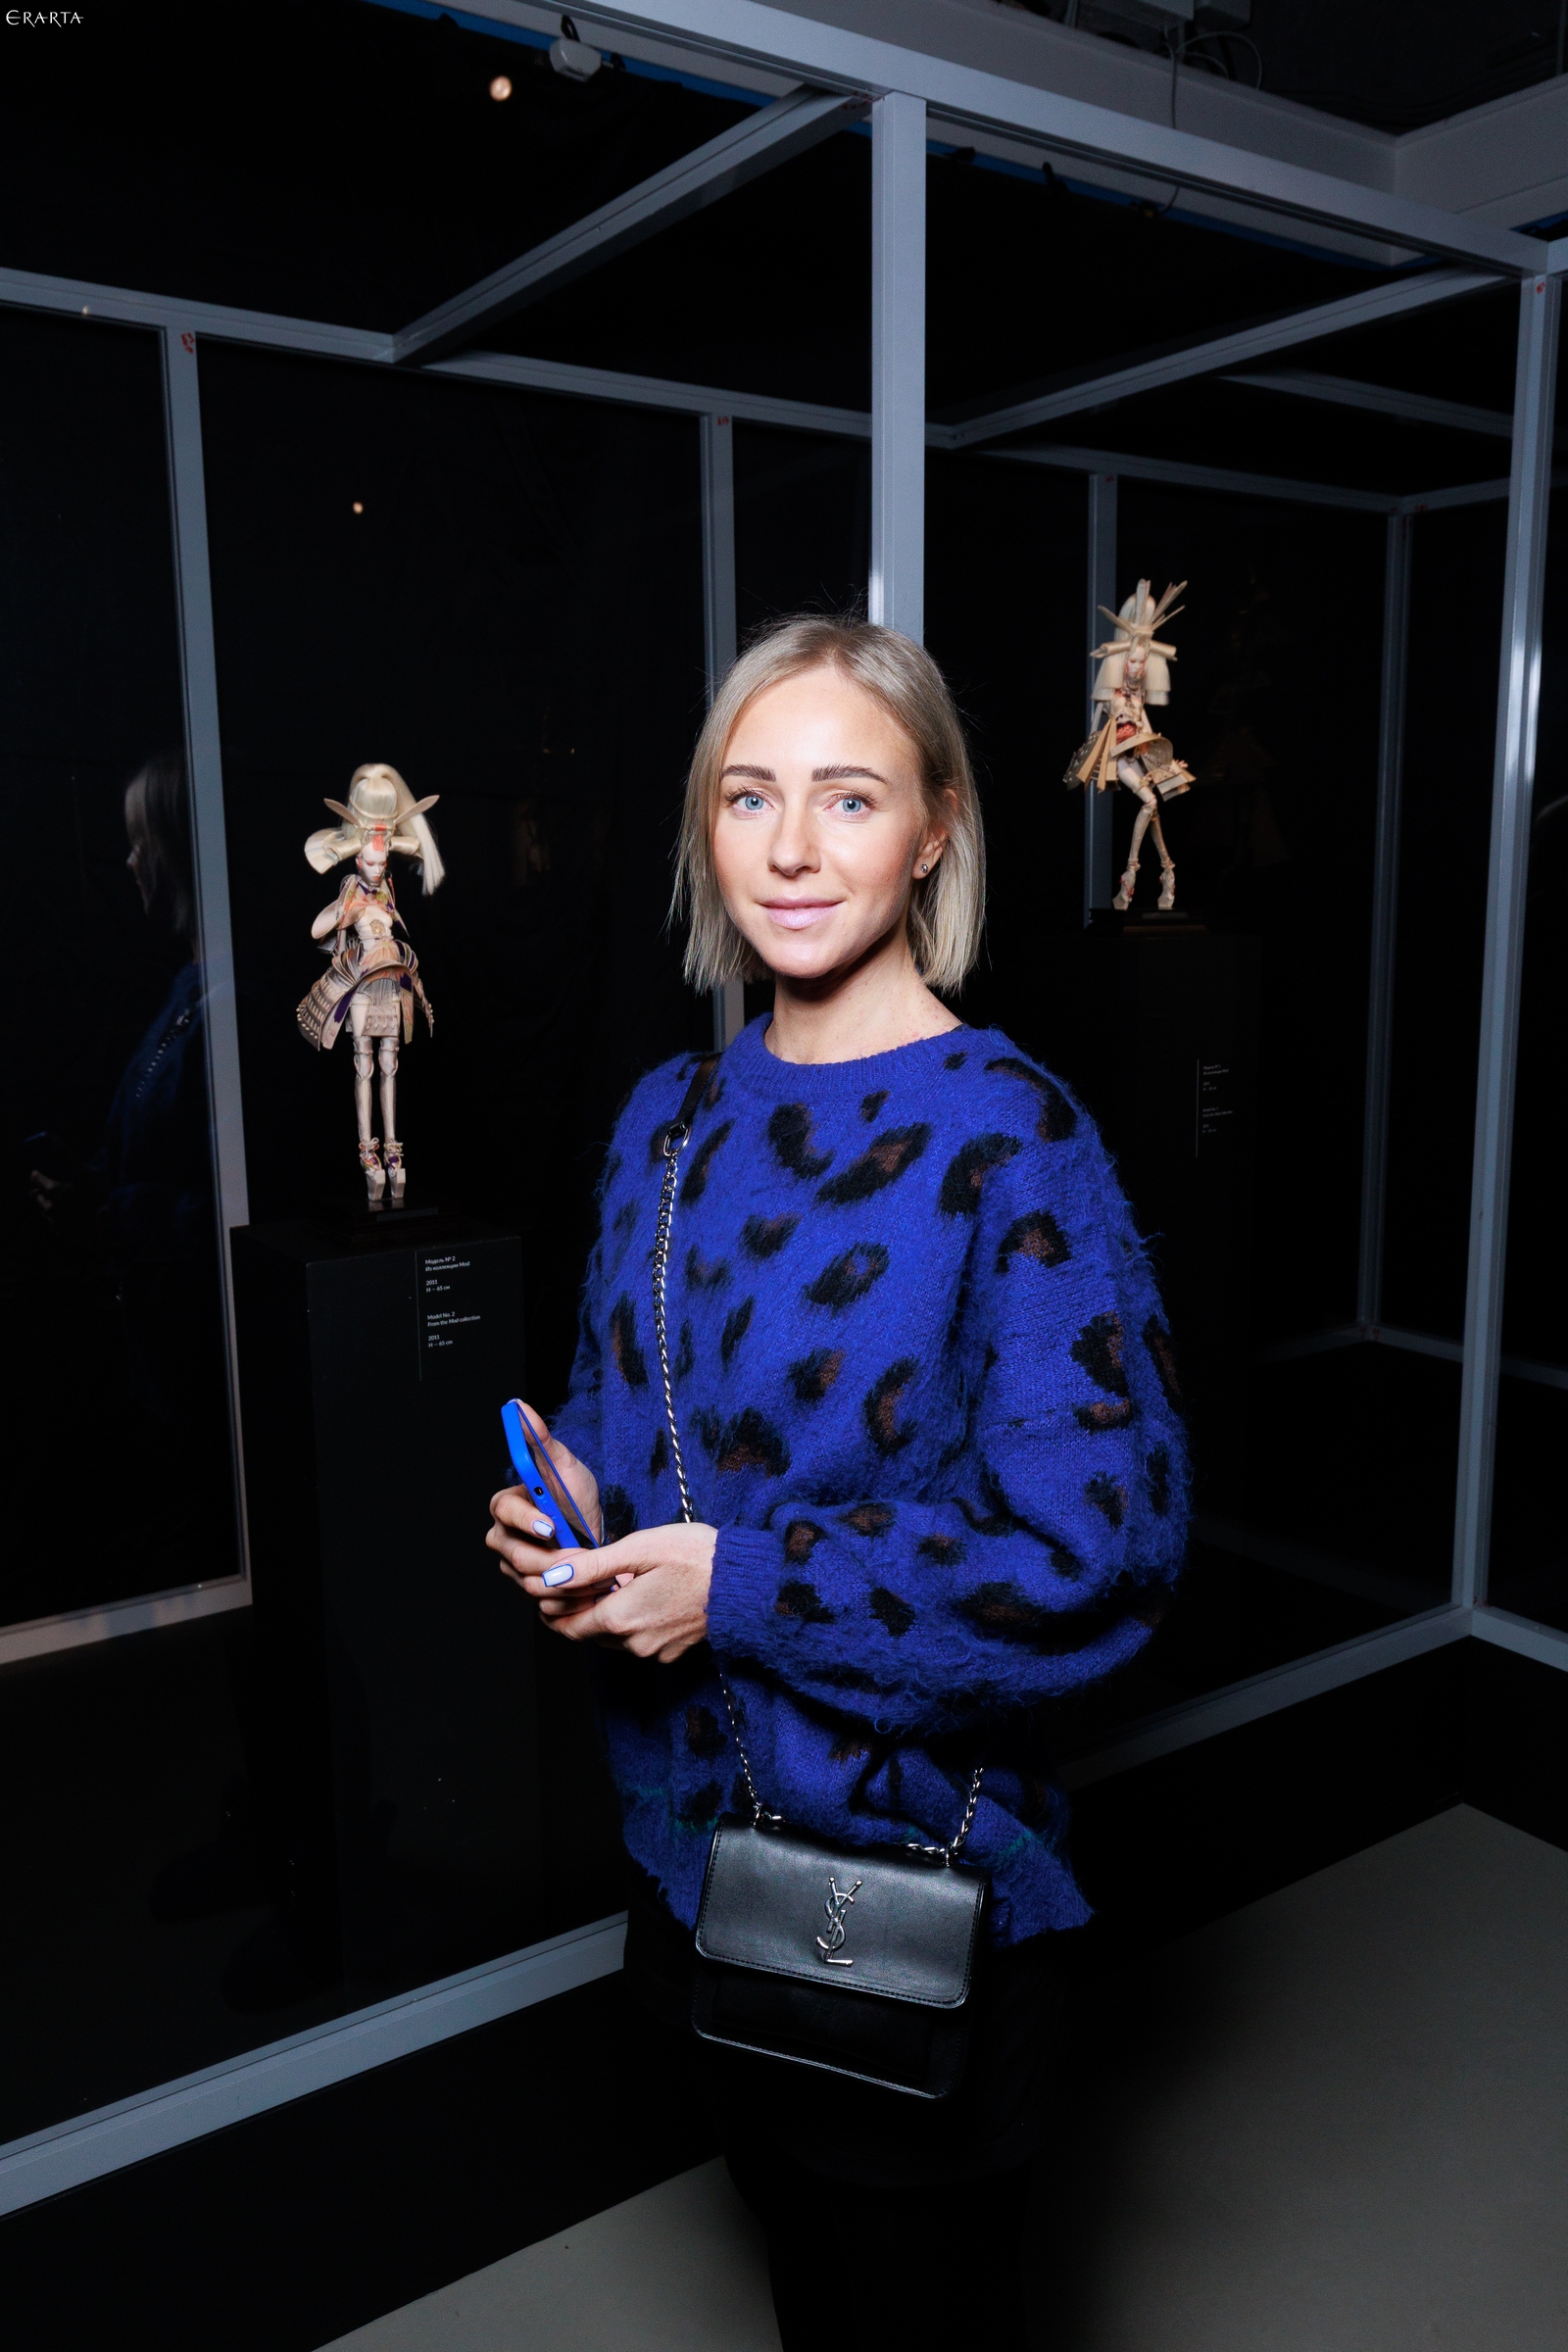 Photo Report: Private View of the Popovy Sisters’ Exhibition